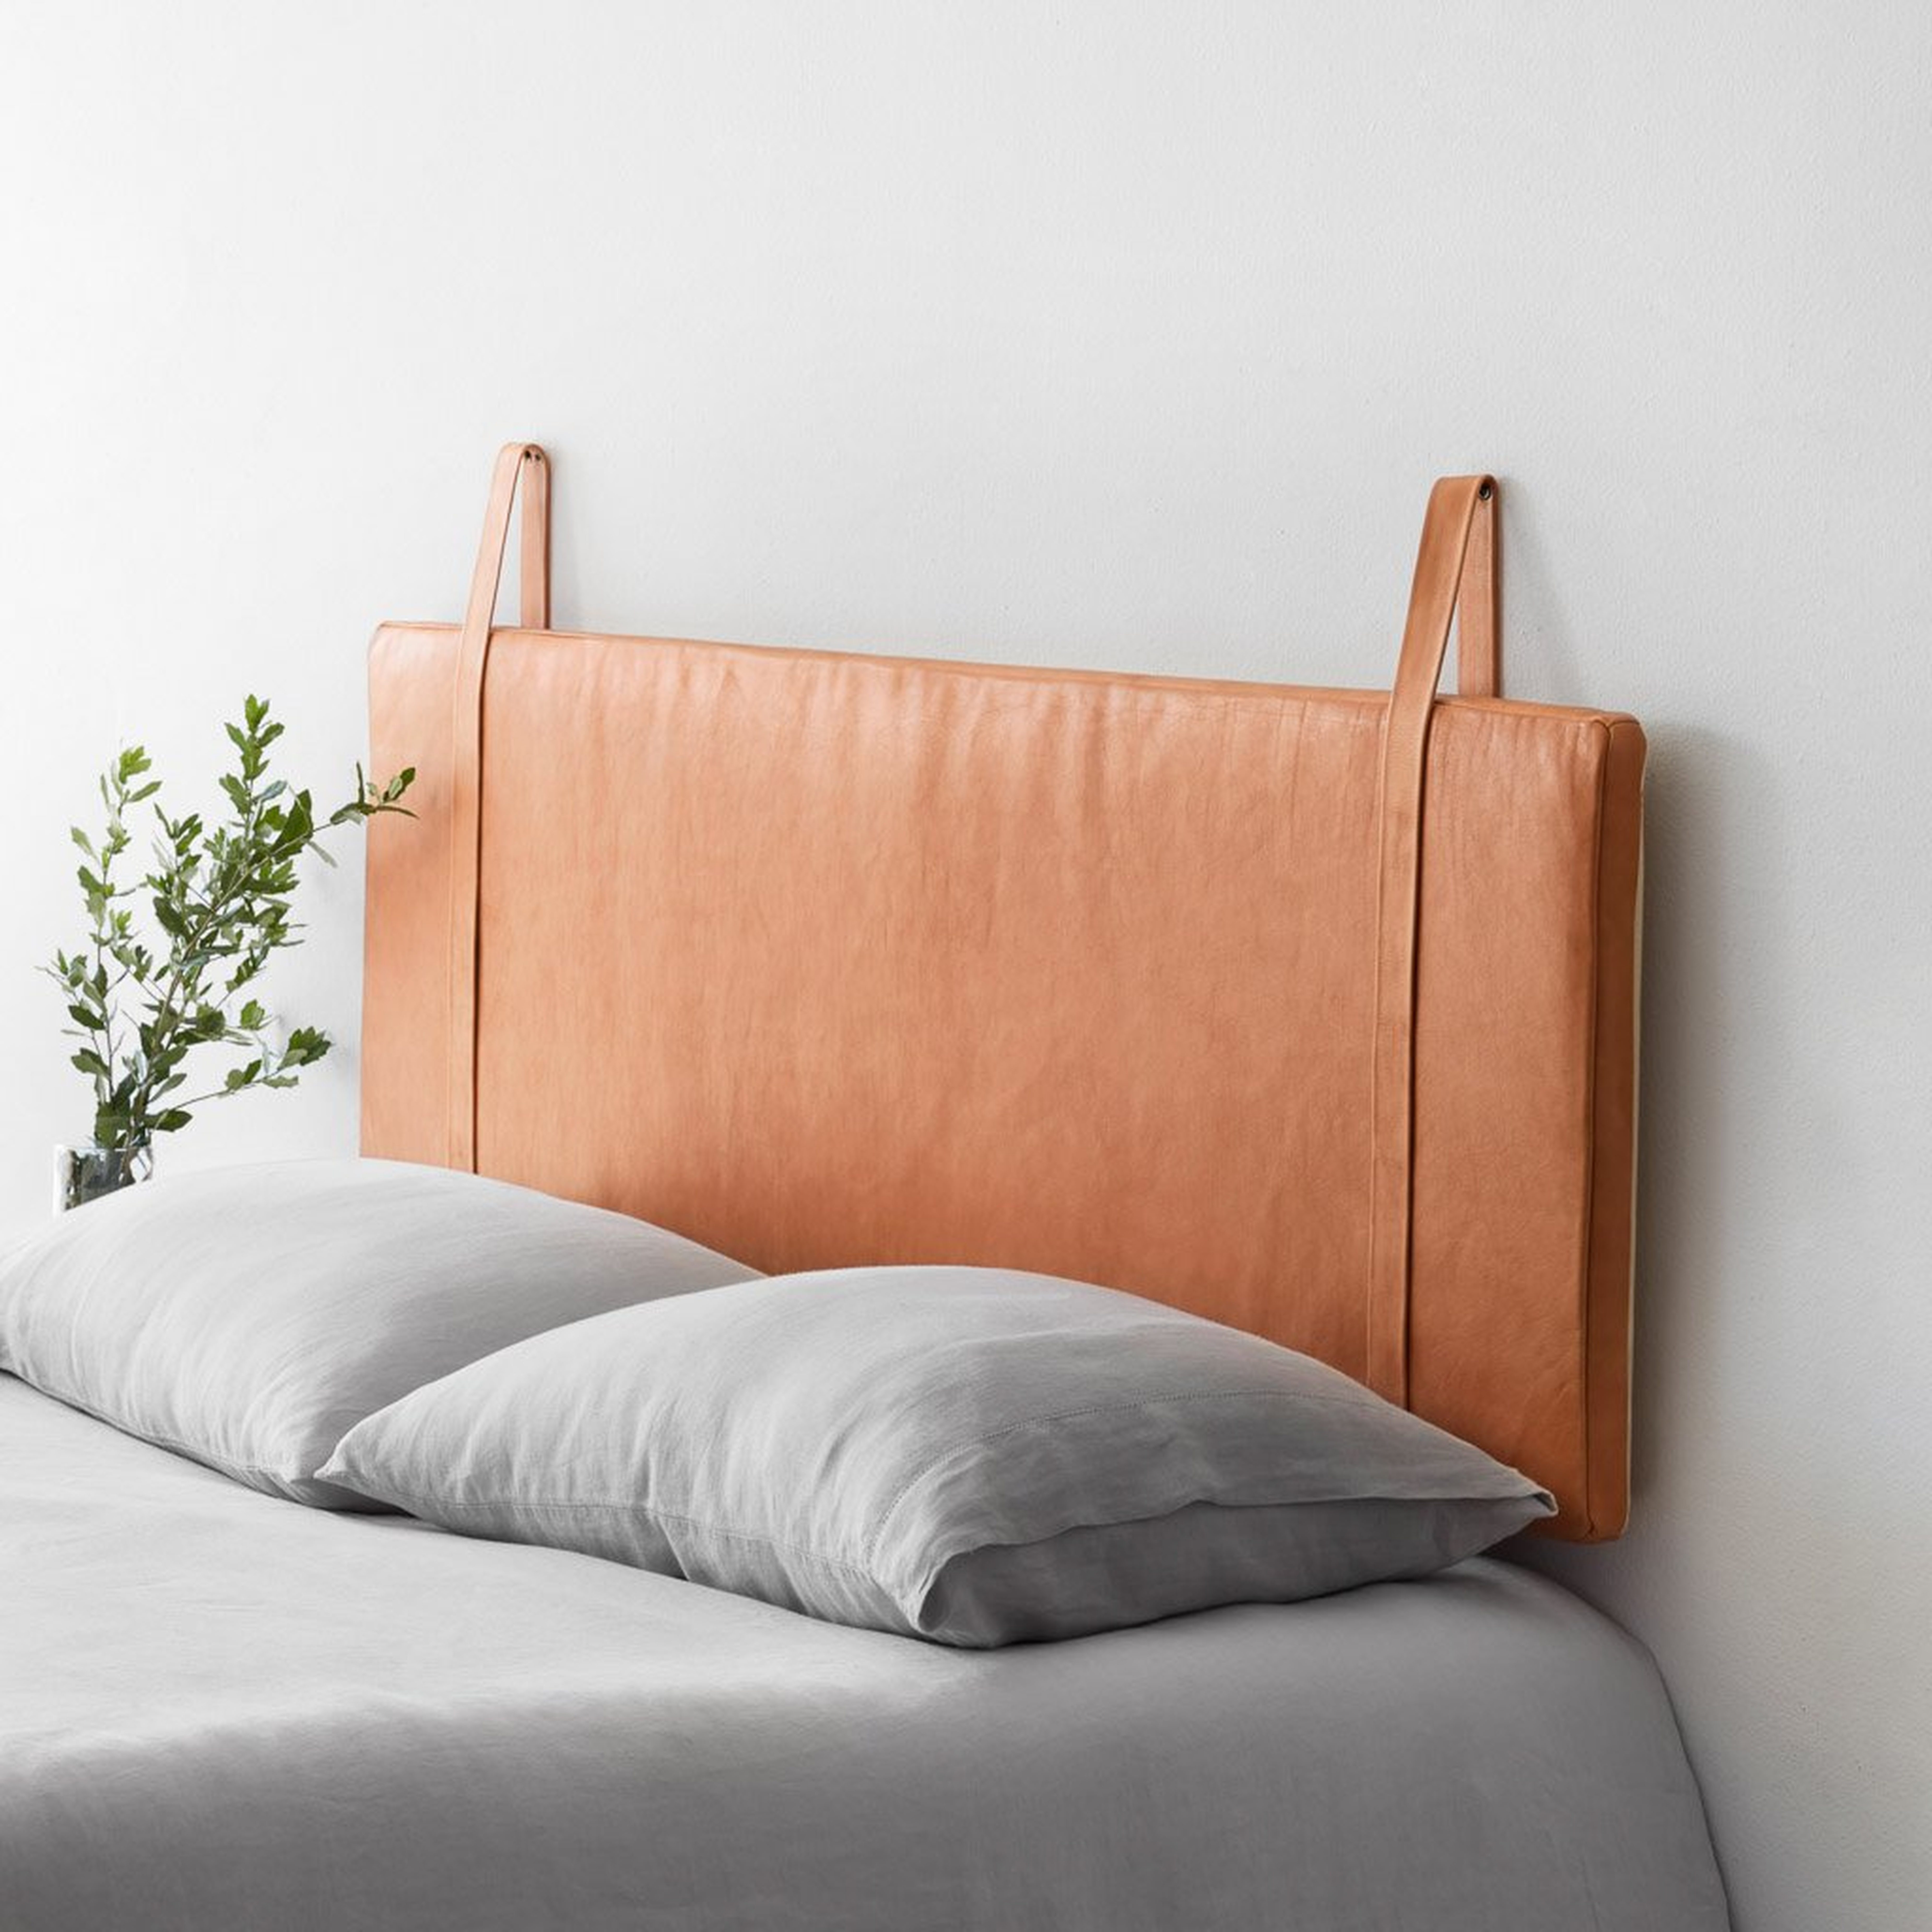 Hanging Leather Headboard - Natural - King/Cali King By The Citizenry - The Citizenry